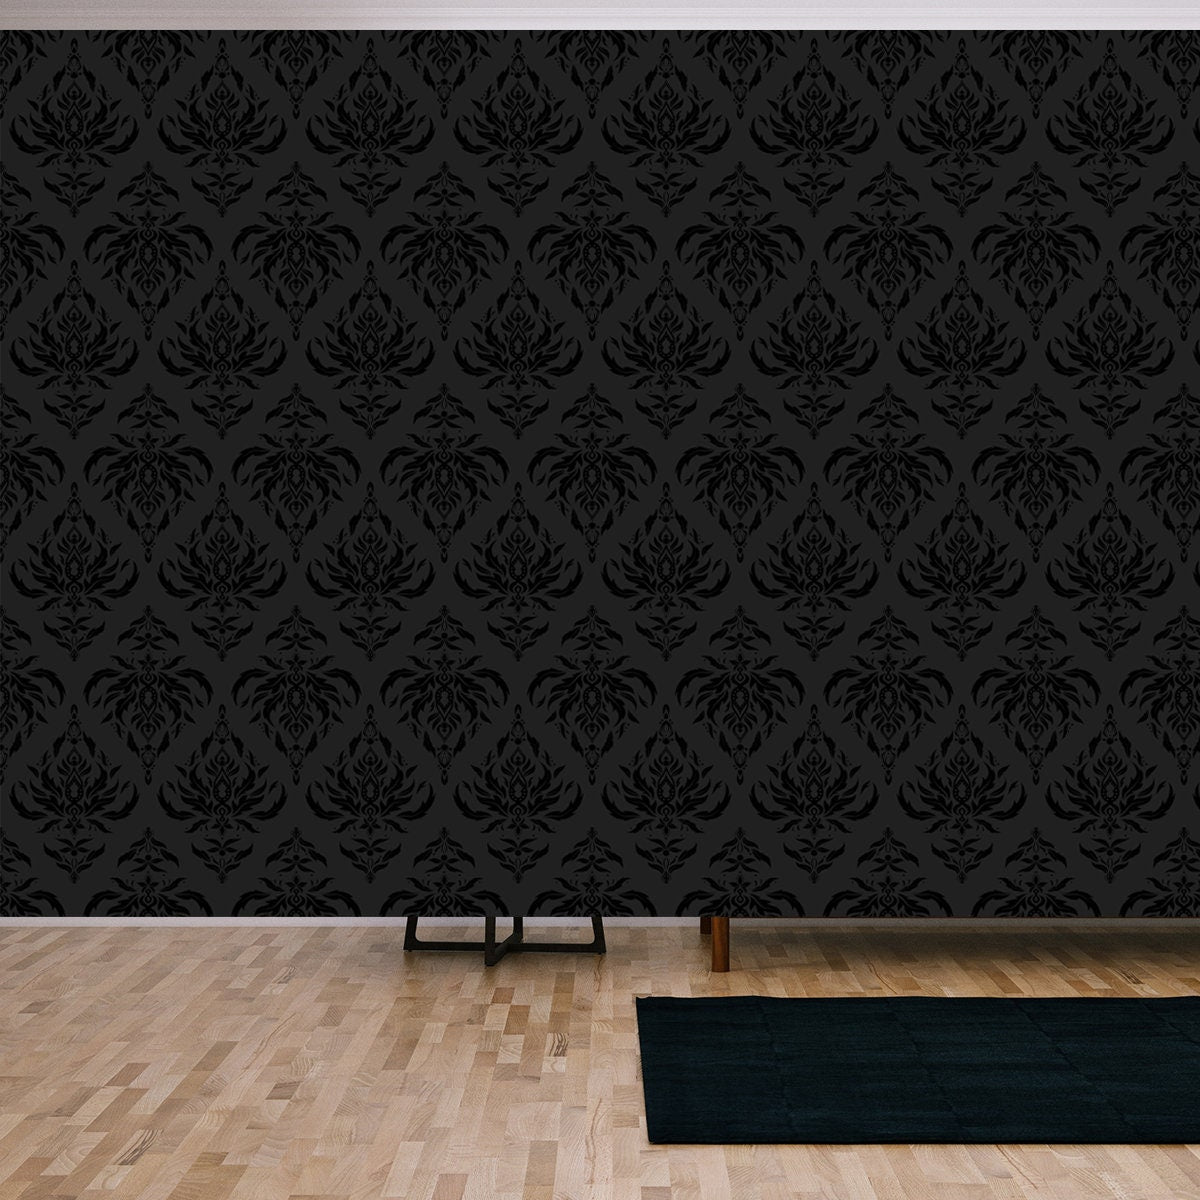 Lace Texture, Raster Tulle Background, Swirly Seamless Pattern in Gray and Black Colors Wallpaper Living Room Mural